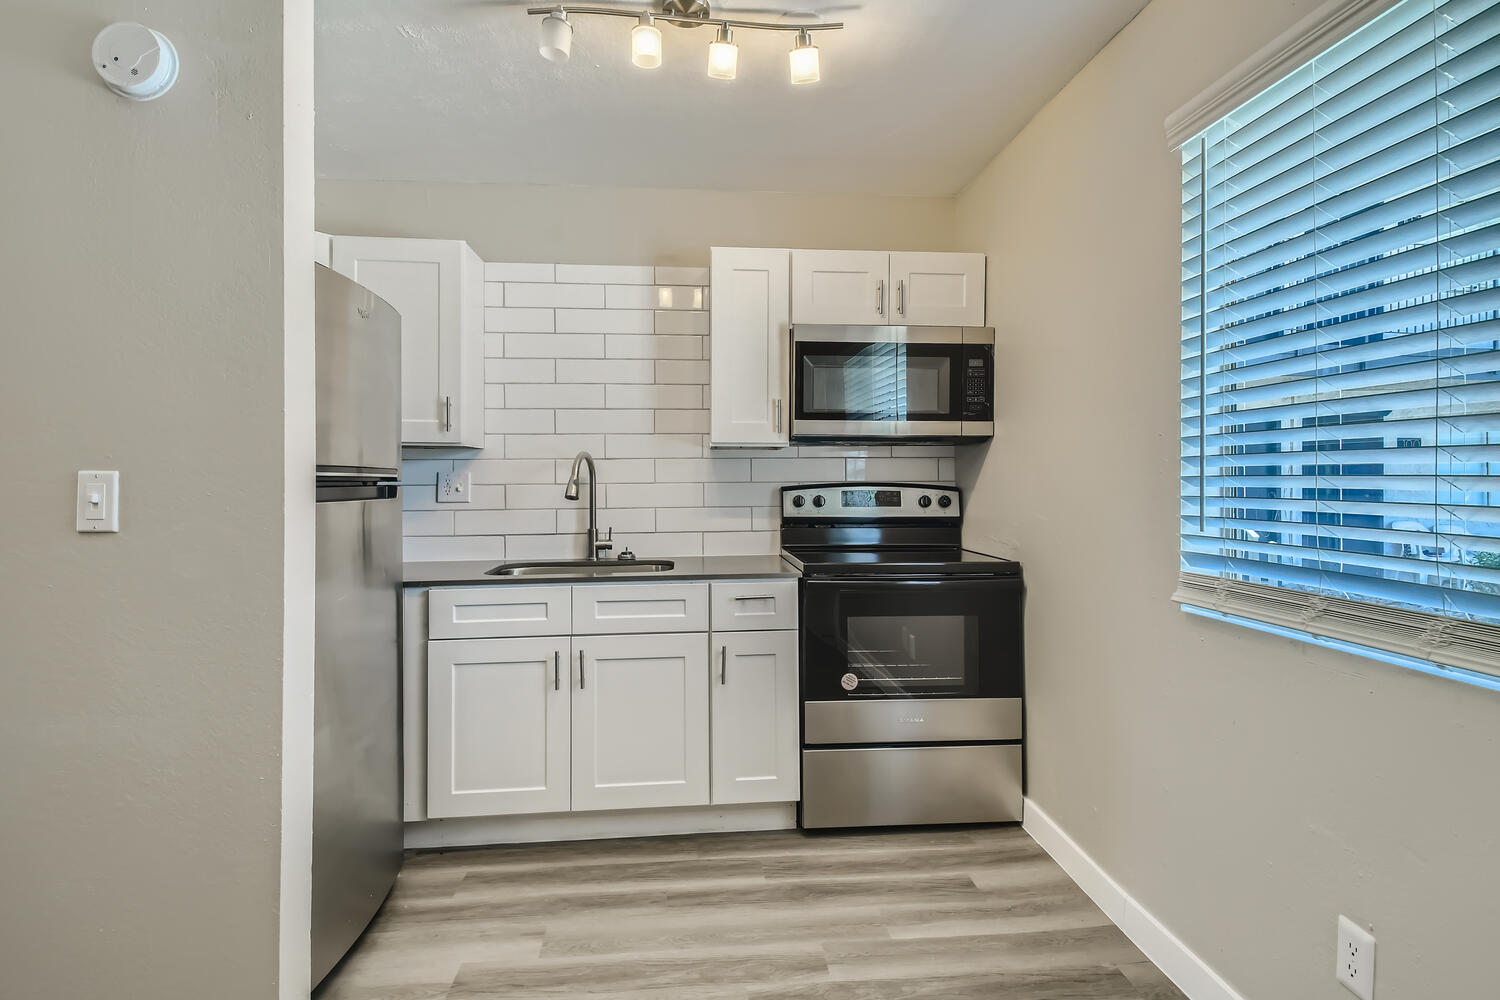 A kitchen with a window, shaker cabinets, and wood-style flooring at Rise at the Palms.